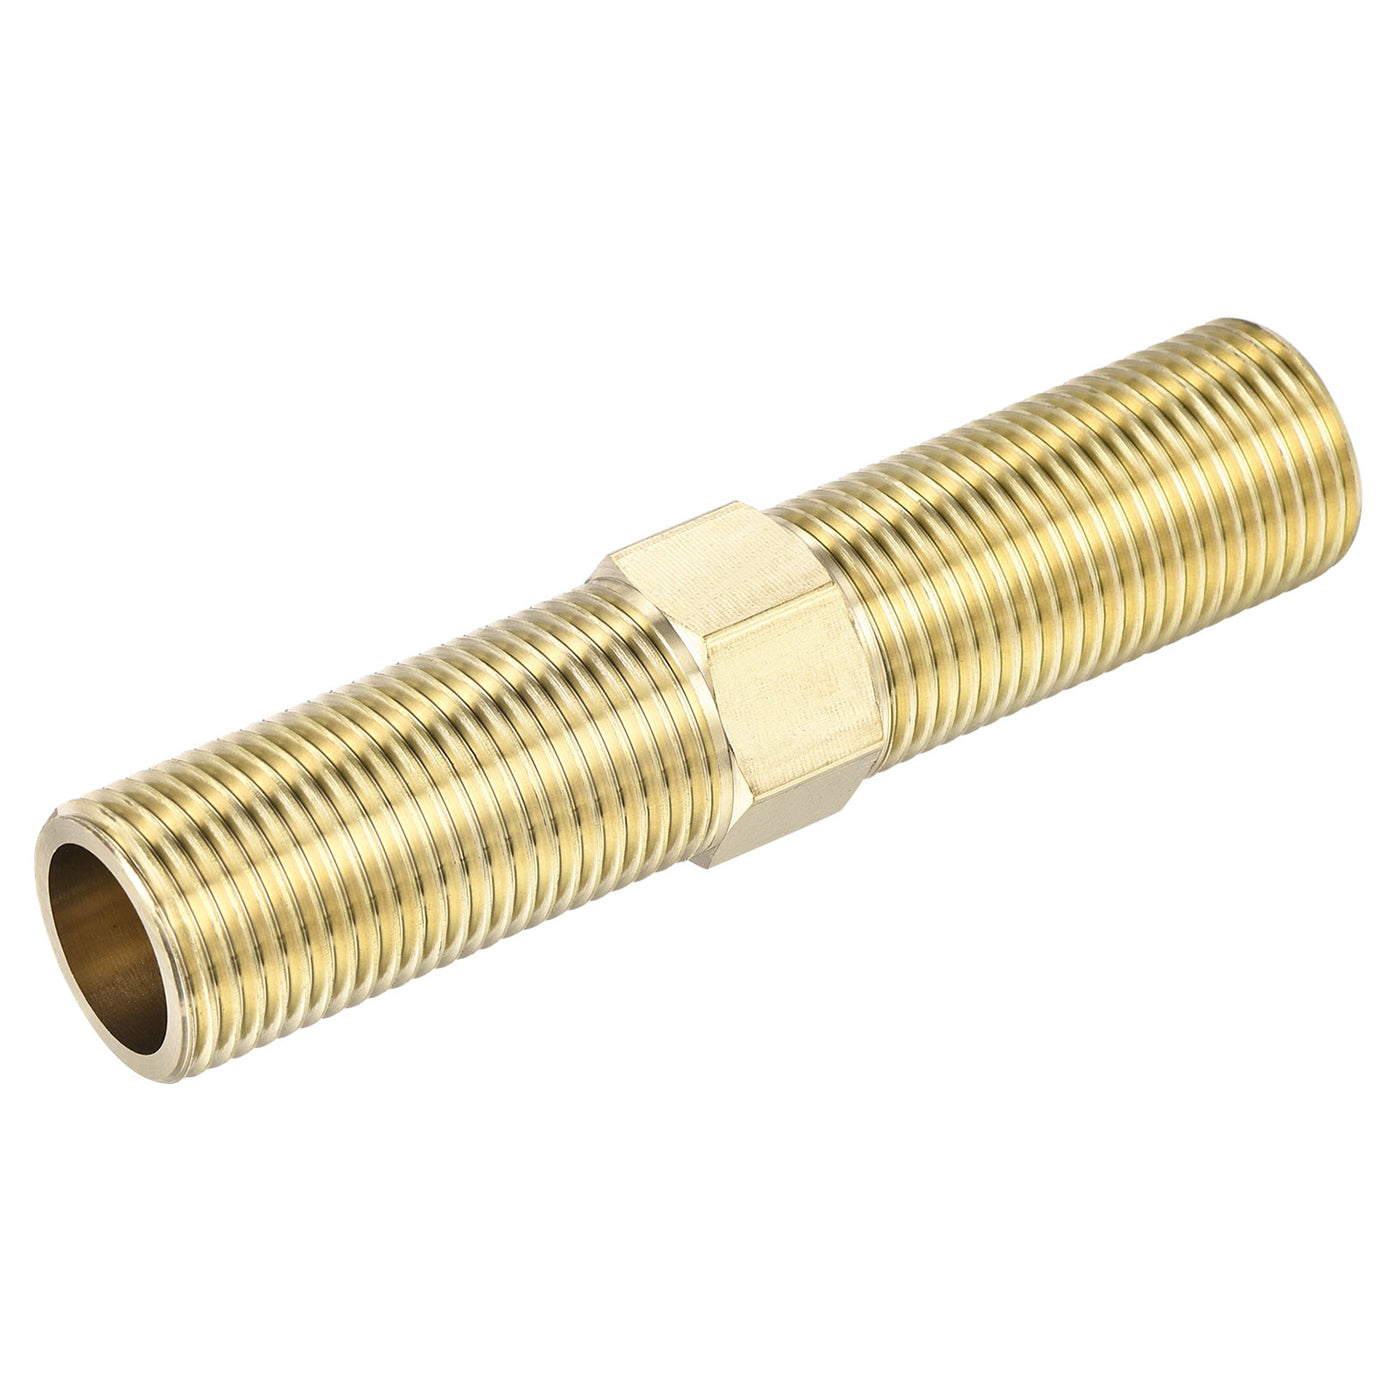 Harfington Brass Pipe Fitting G1/2 Male Thread 34mm Hex Connector Pipe Adapter